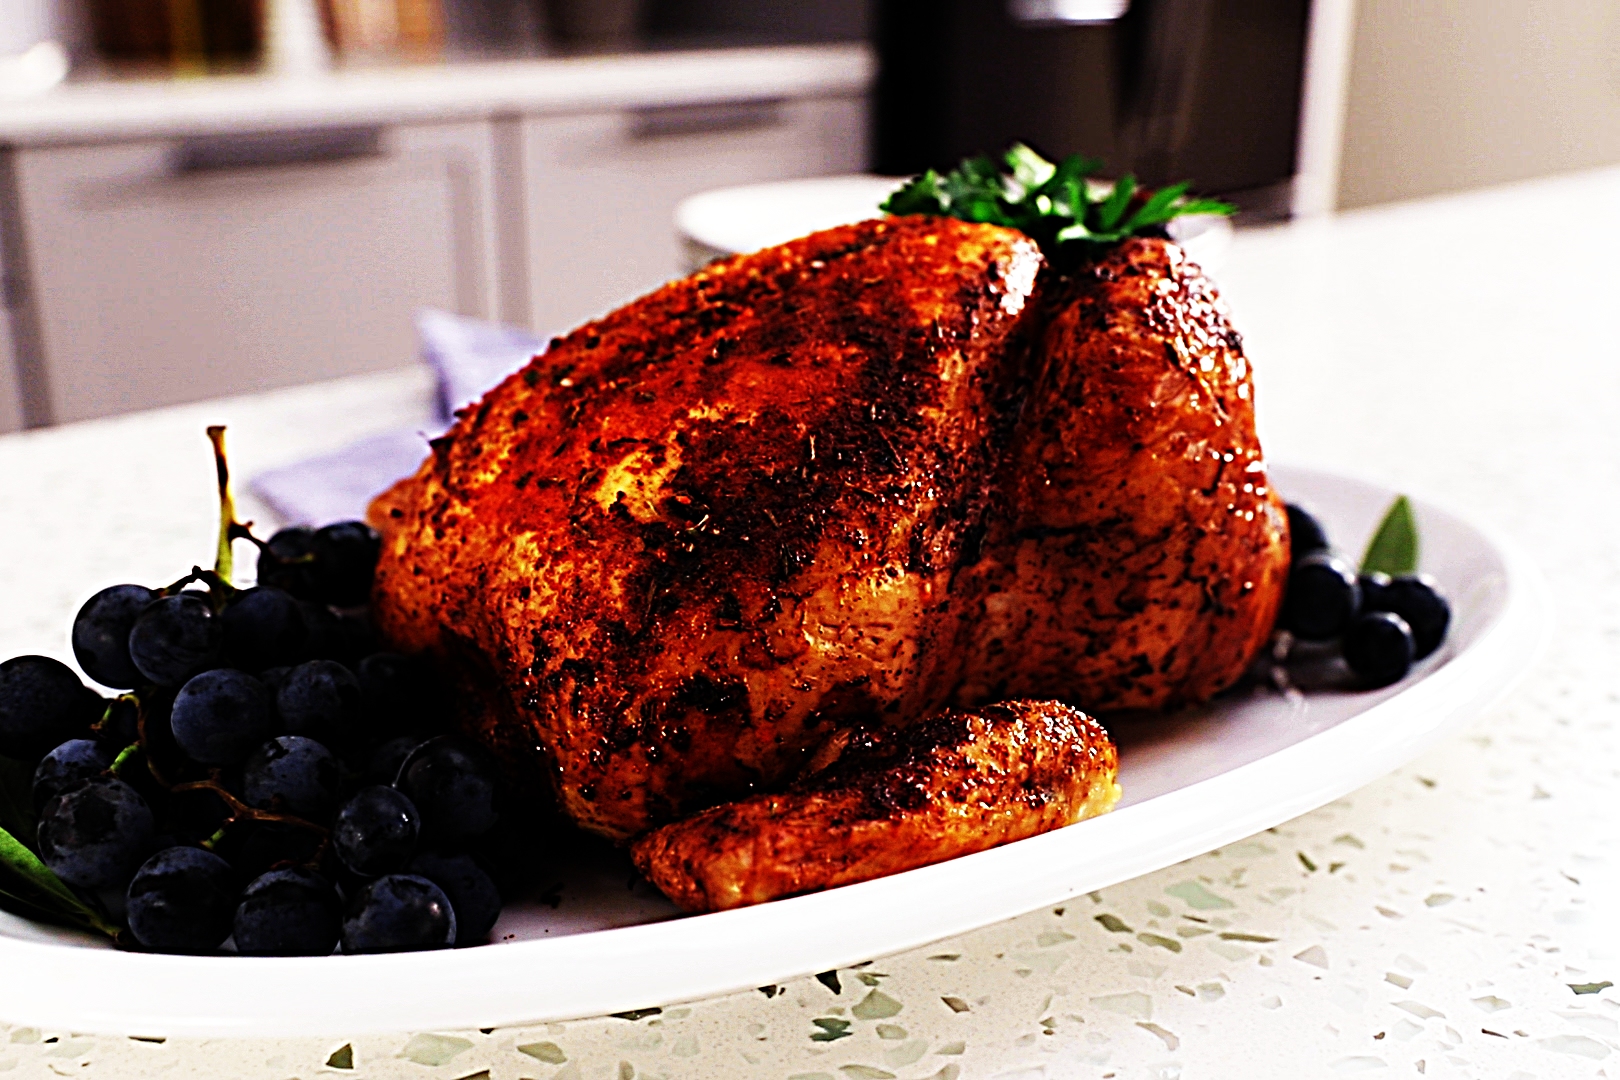 Stupid-Easy Recipe for Southern Cajun Spice Roasted Chicken (#1 Top-Rated)